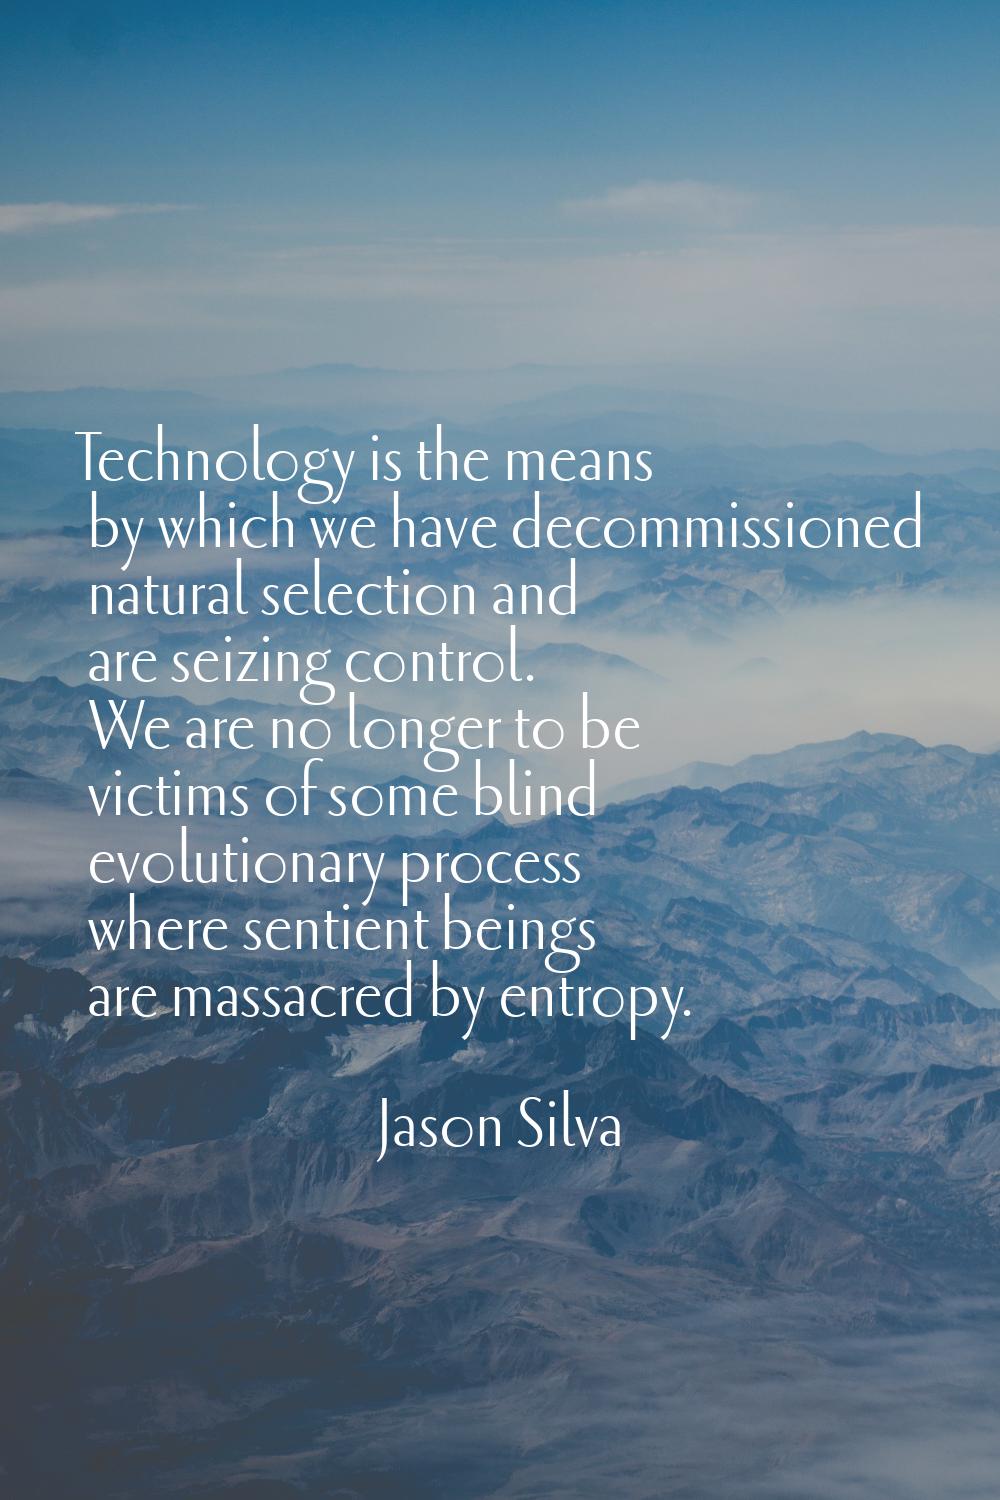 Technology is the means by which we have decommissioned natural selection and are seizing control. 